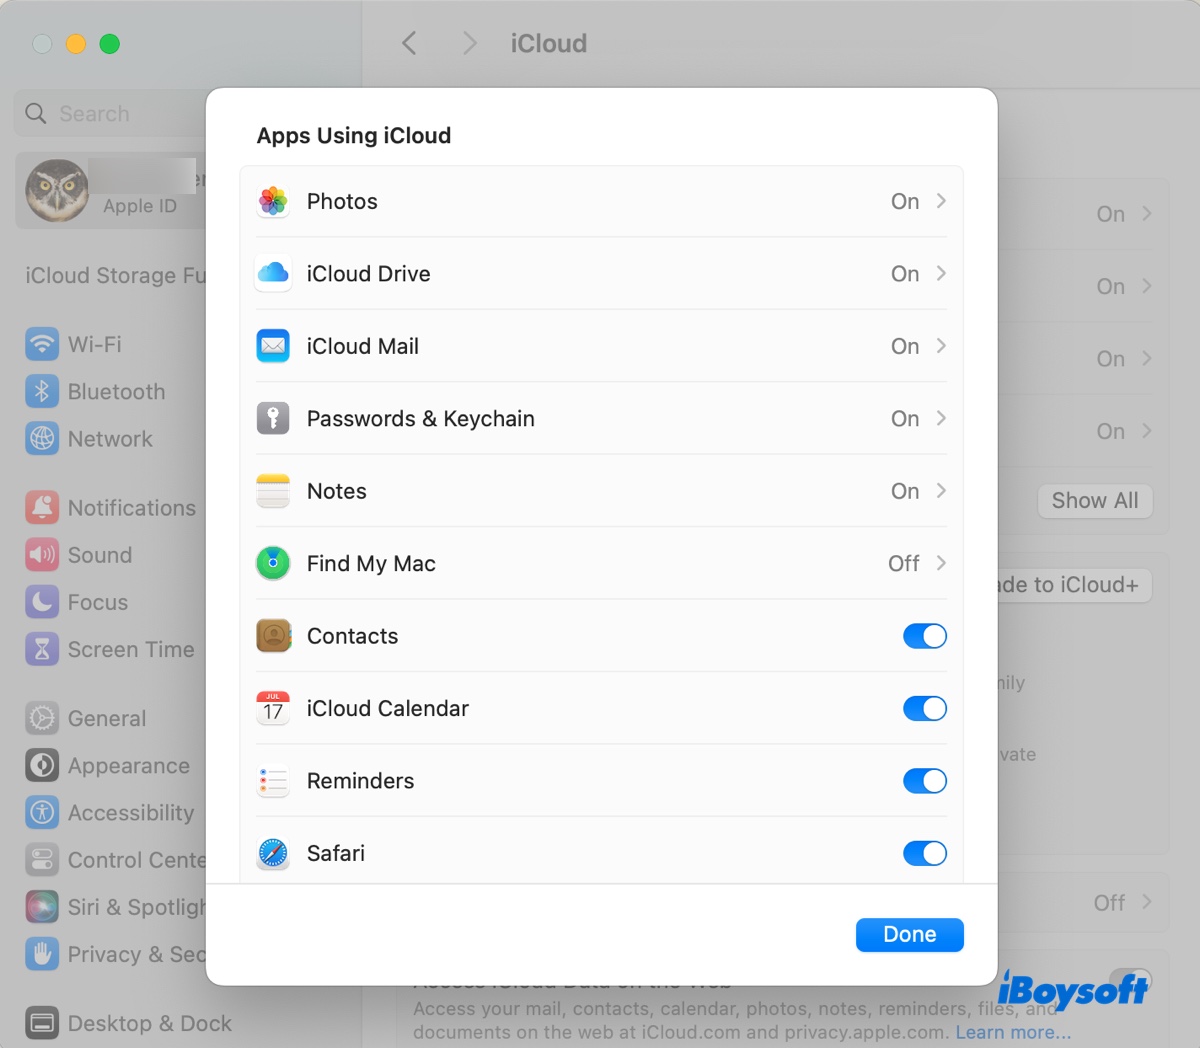 Resycn apps with iCloud if they are not working on macOS Sonoma